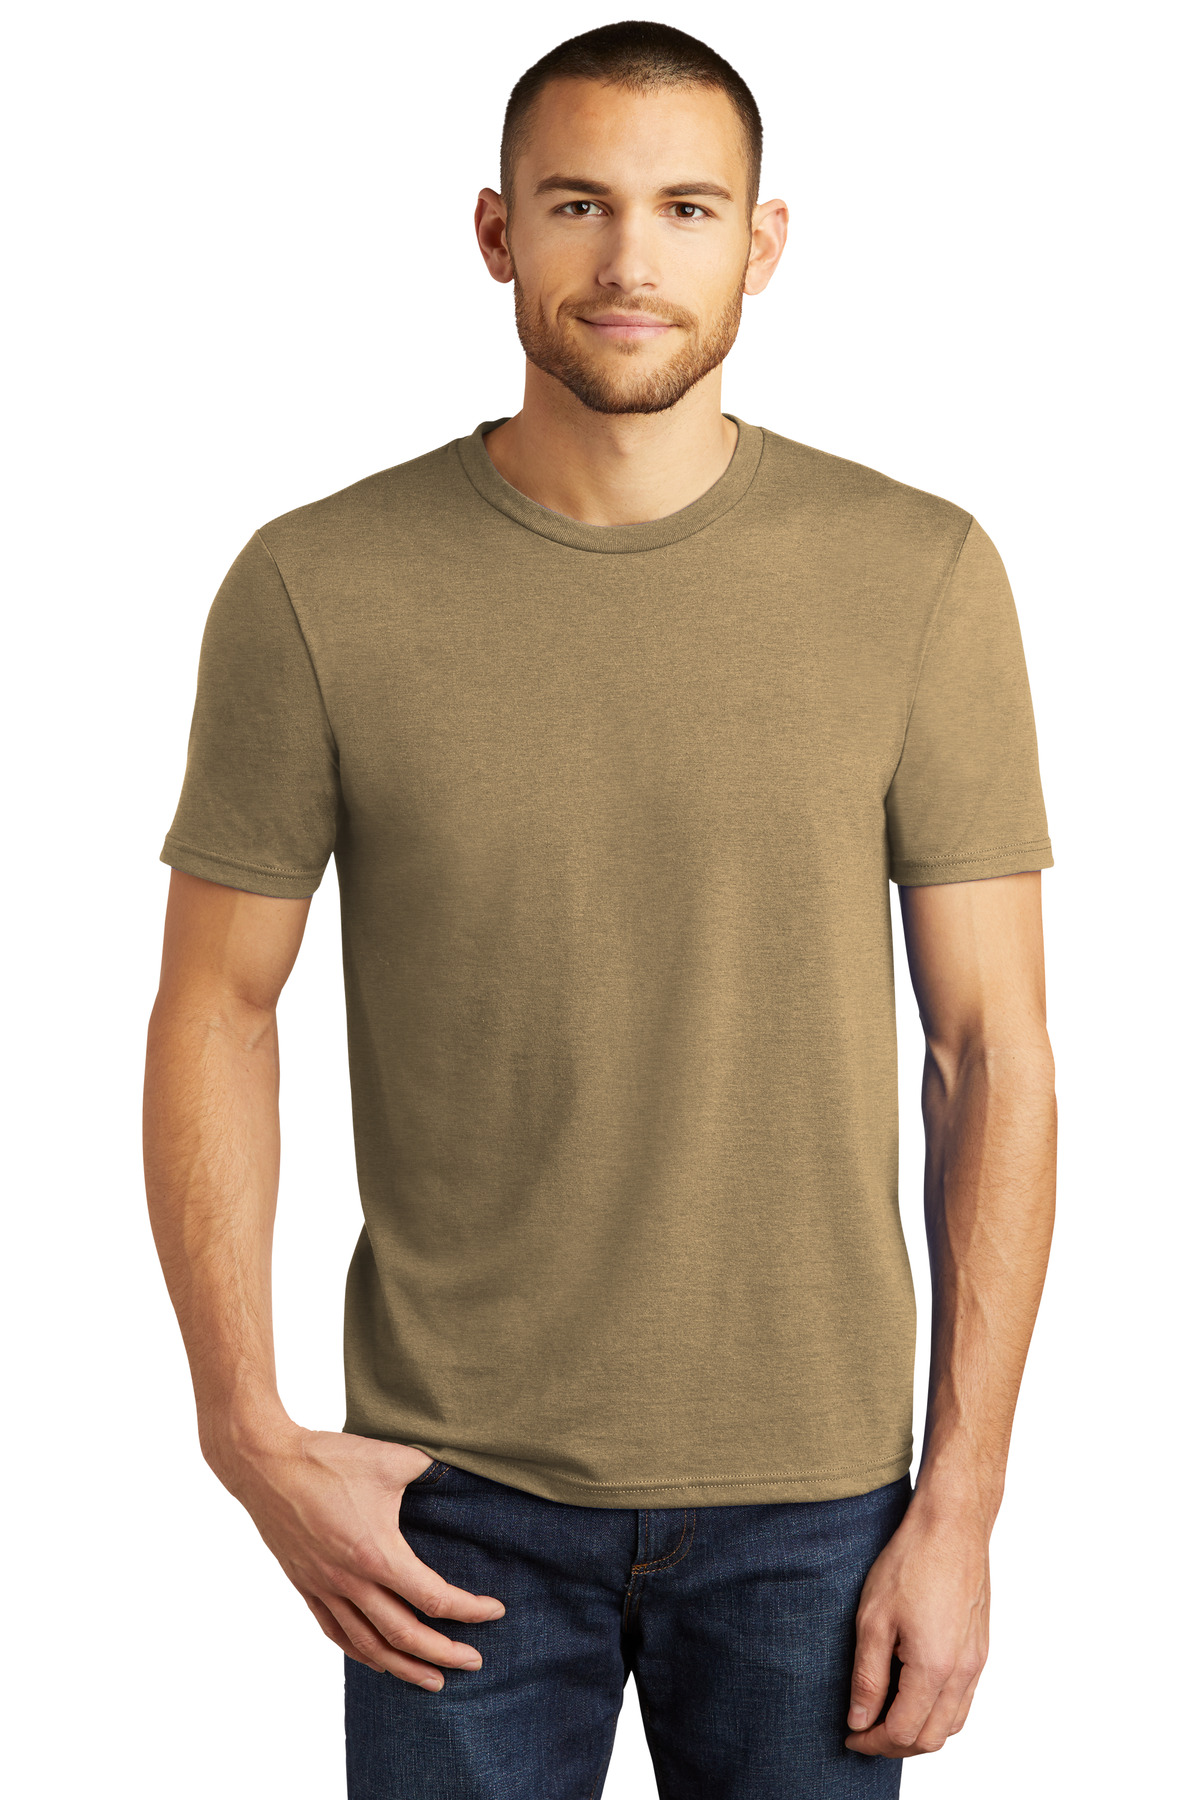 Selected Color is Coyote Brown Heather